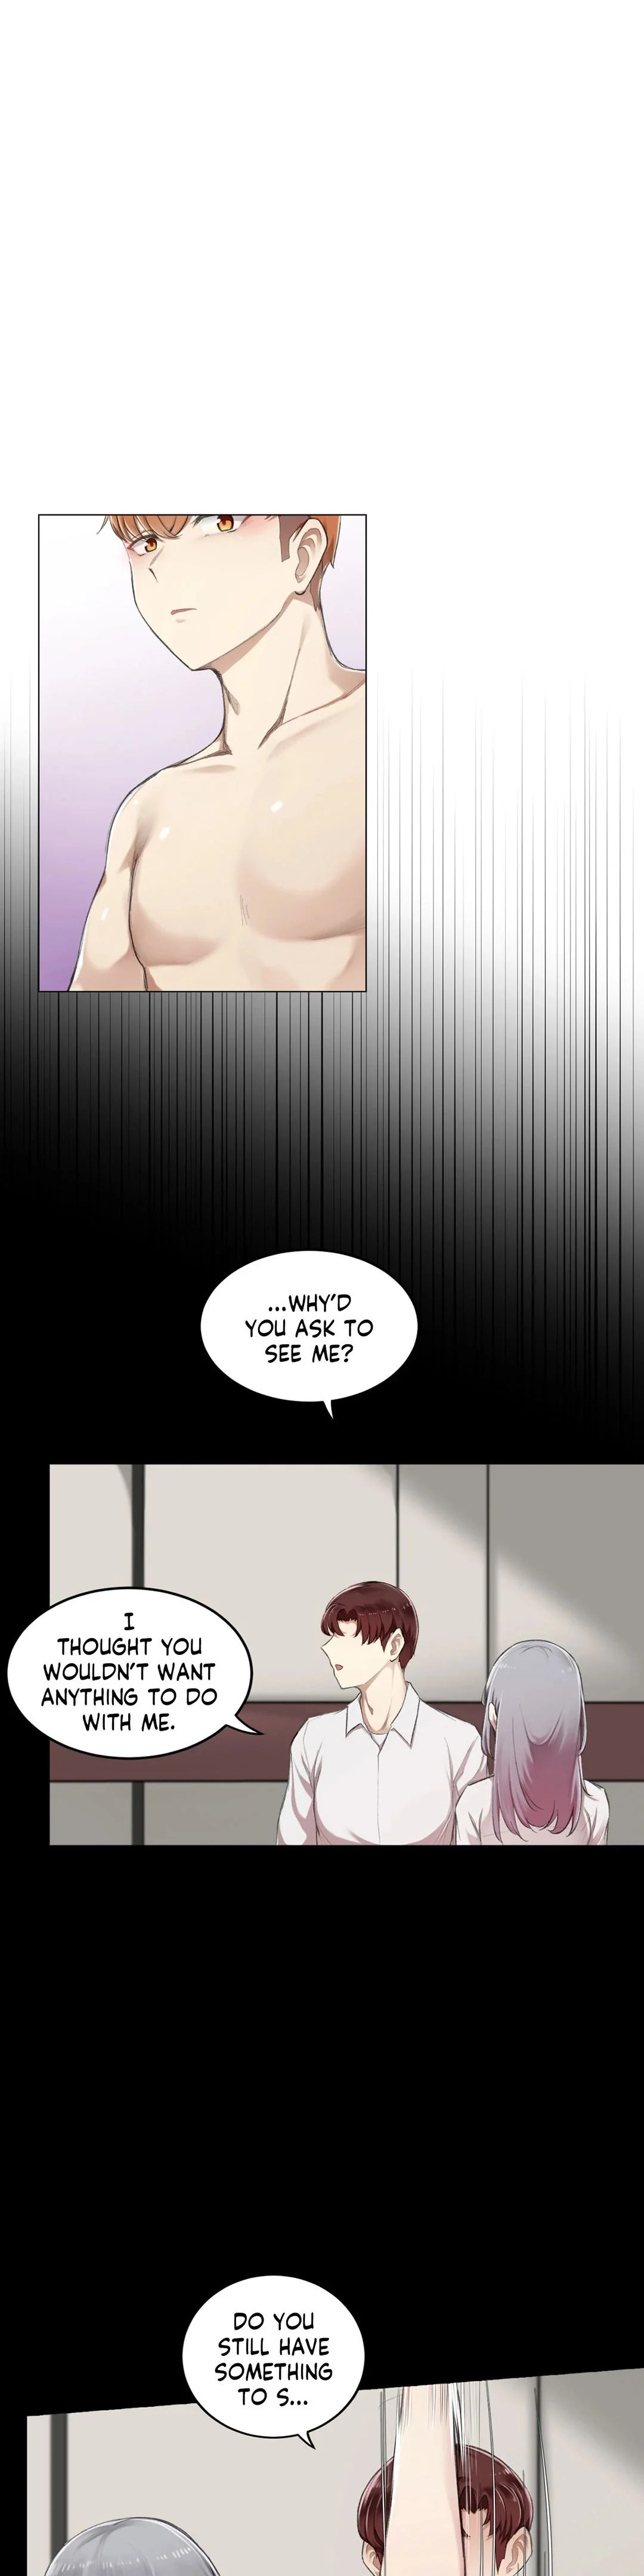 Sexcape Room: Snap Off - Chapter 6 Page 16